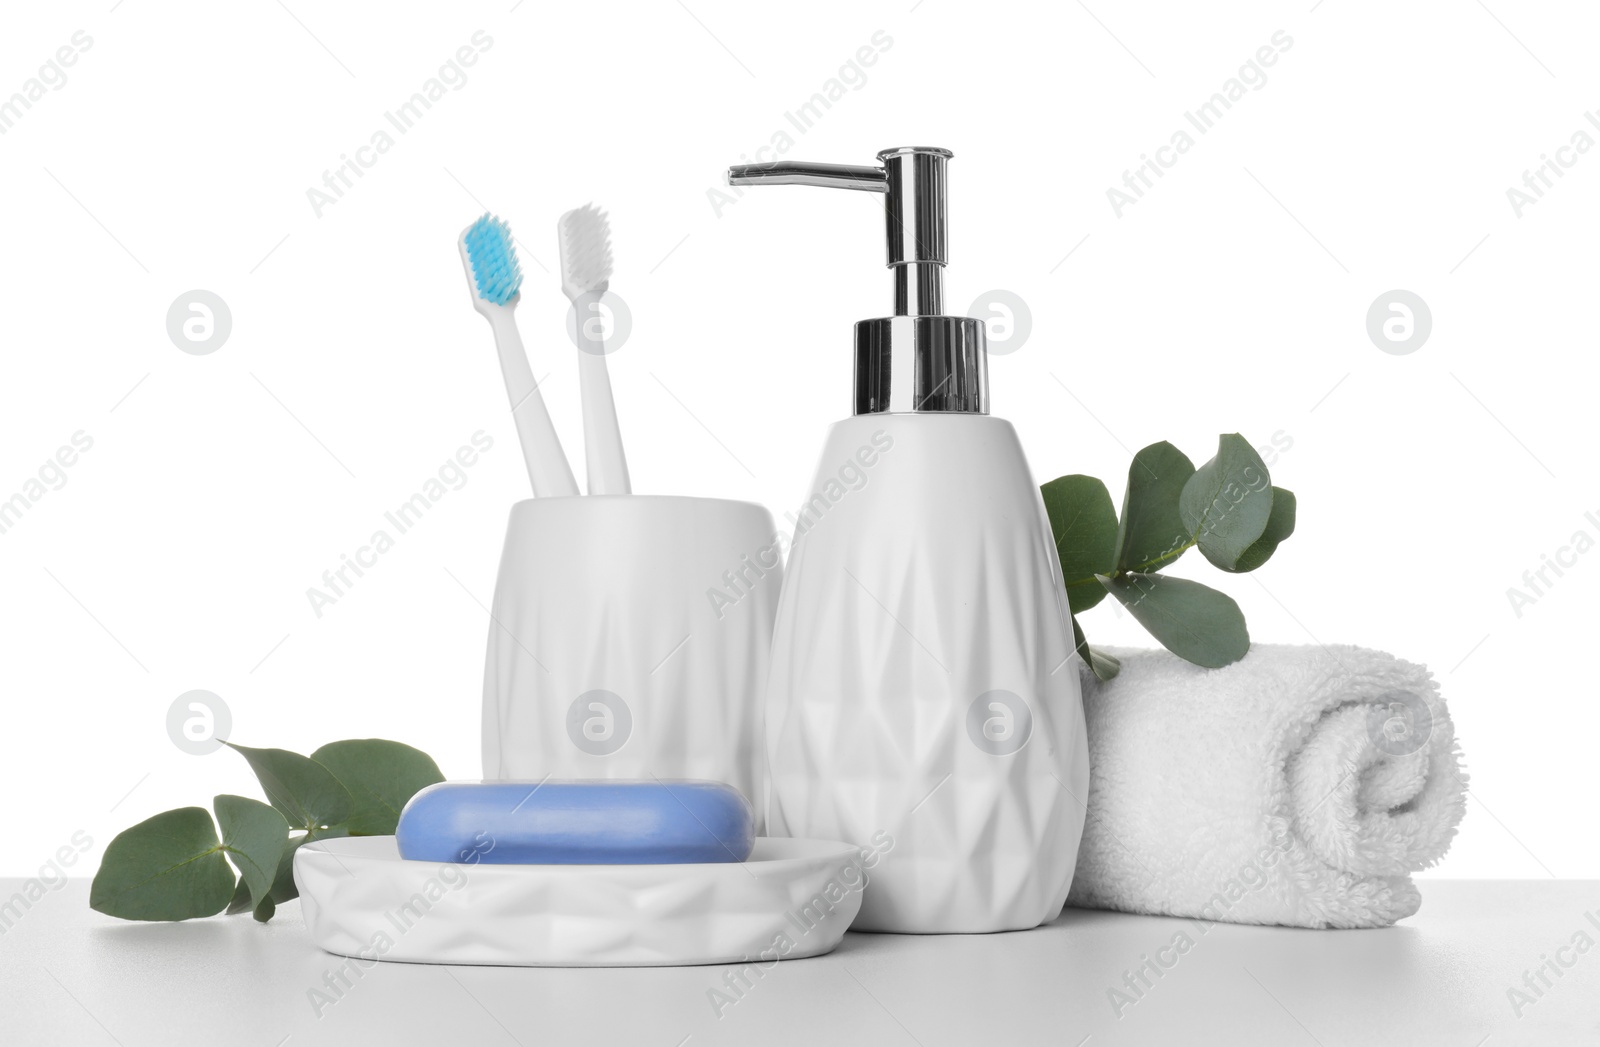 Photo of Bath accessories. Different personal care products and eucalyptus branches on table against white background